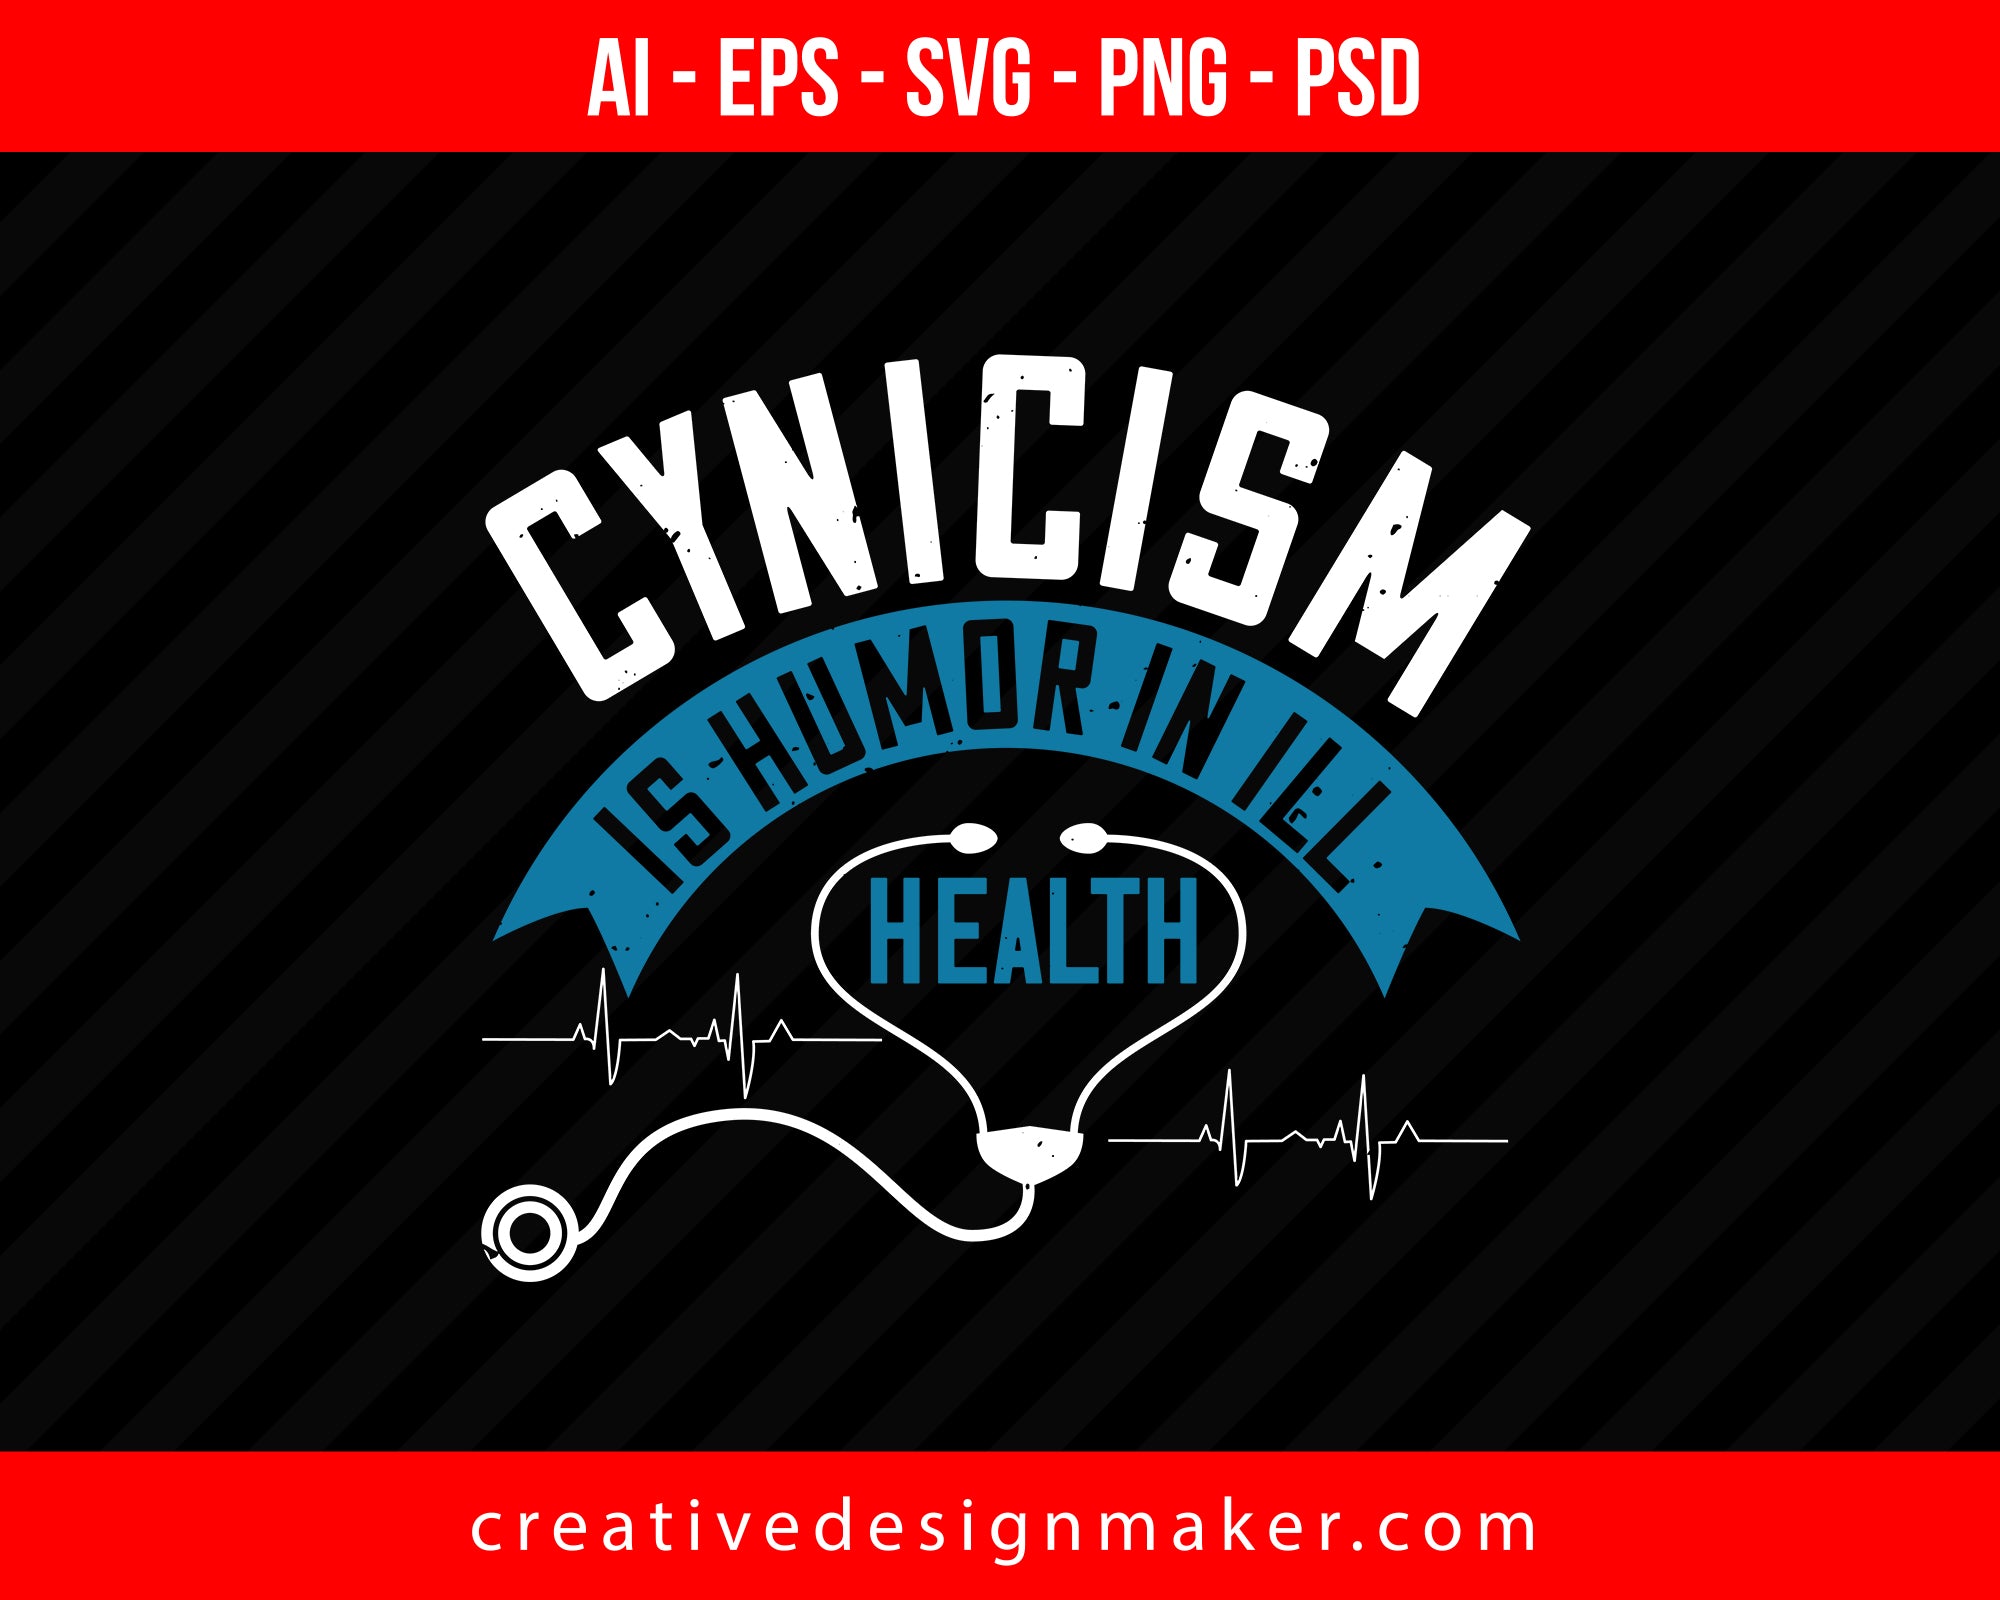 Cynicism Is Humor In Ill World Health Print Ready Editable T-Shirt SVG Design!